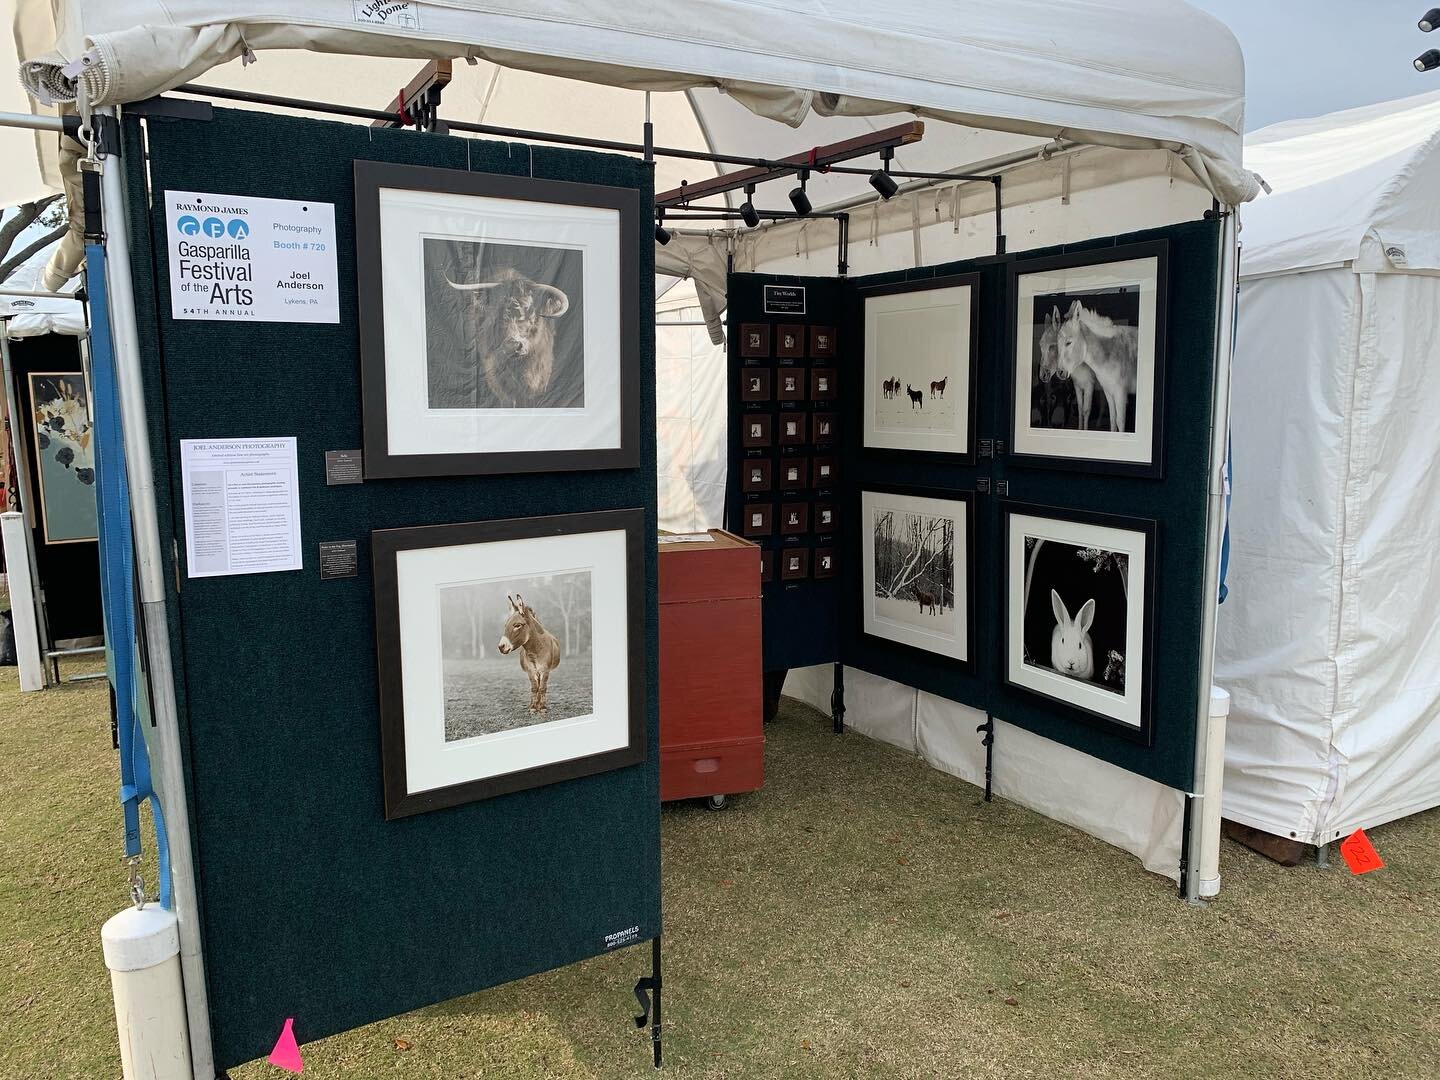 Ready for @gasparillaarts today and tomorrow, along the riverfront in Tampa. I&rsquo;m in booth 720 with photographs from my project Sanctuary #gasparillaarts #photography